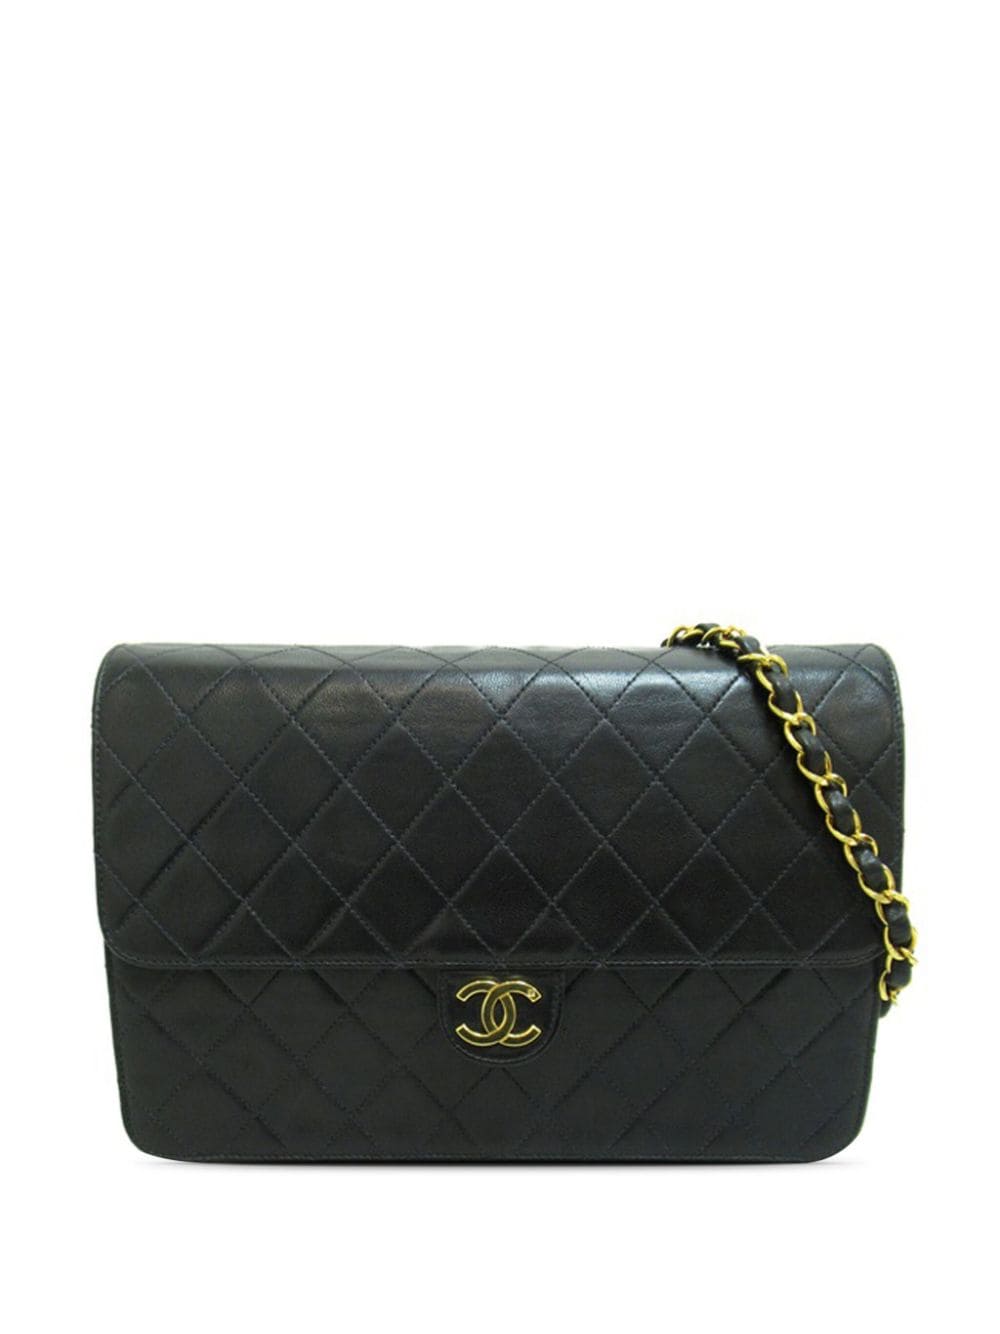 Pre-owned Chanel 1994-1996 Cc Quilted Lambskin Single Flap Crossbody Bag In Black